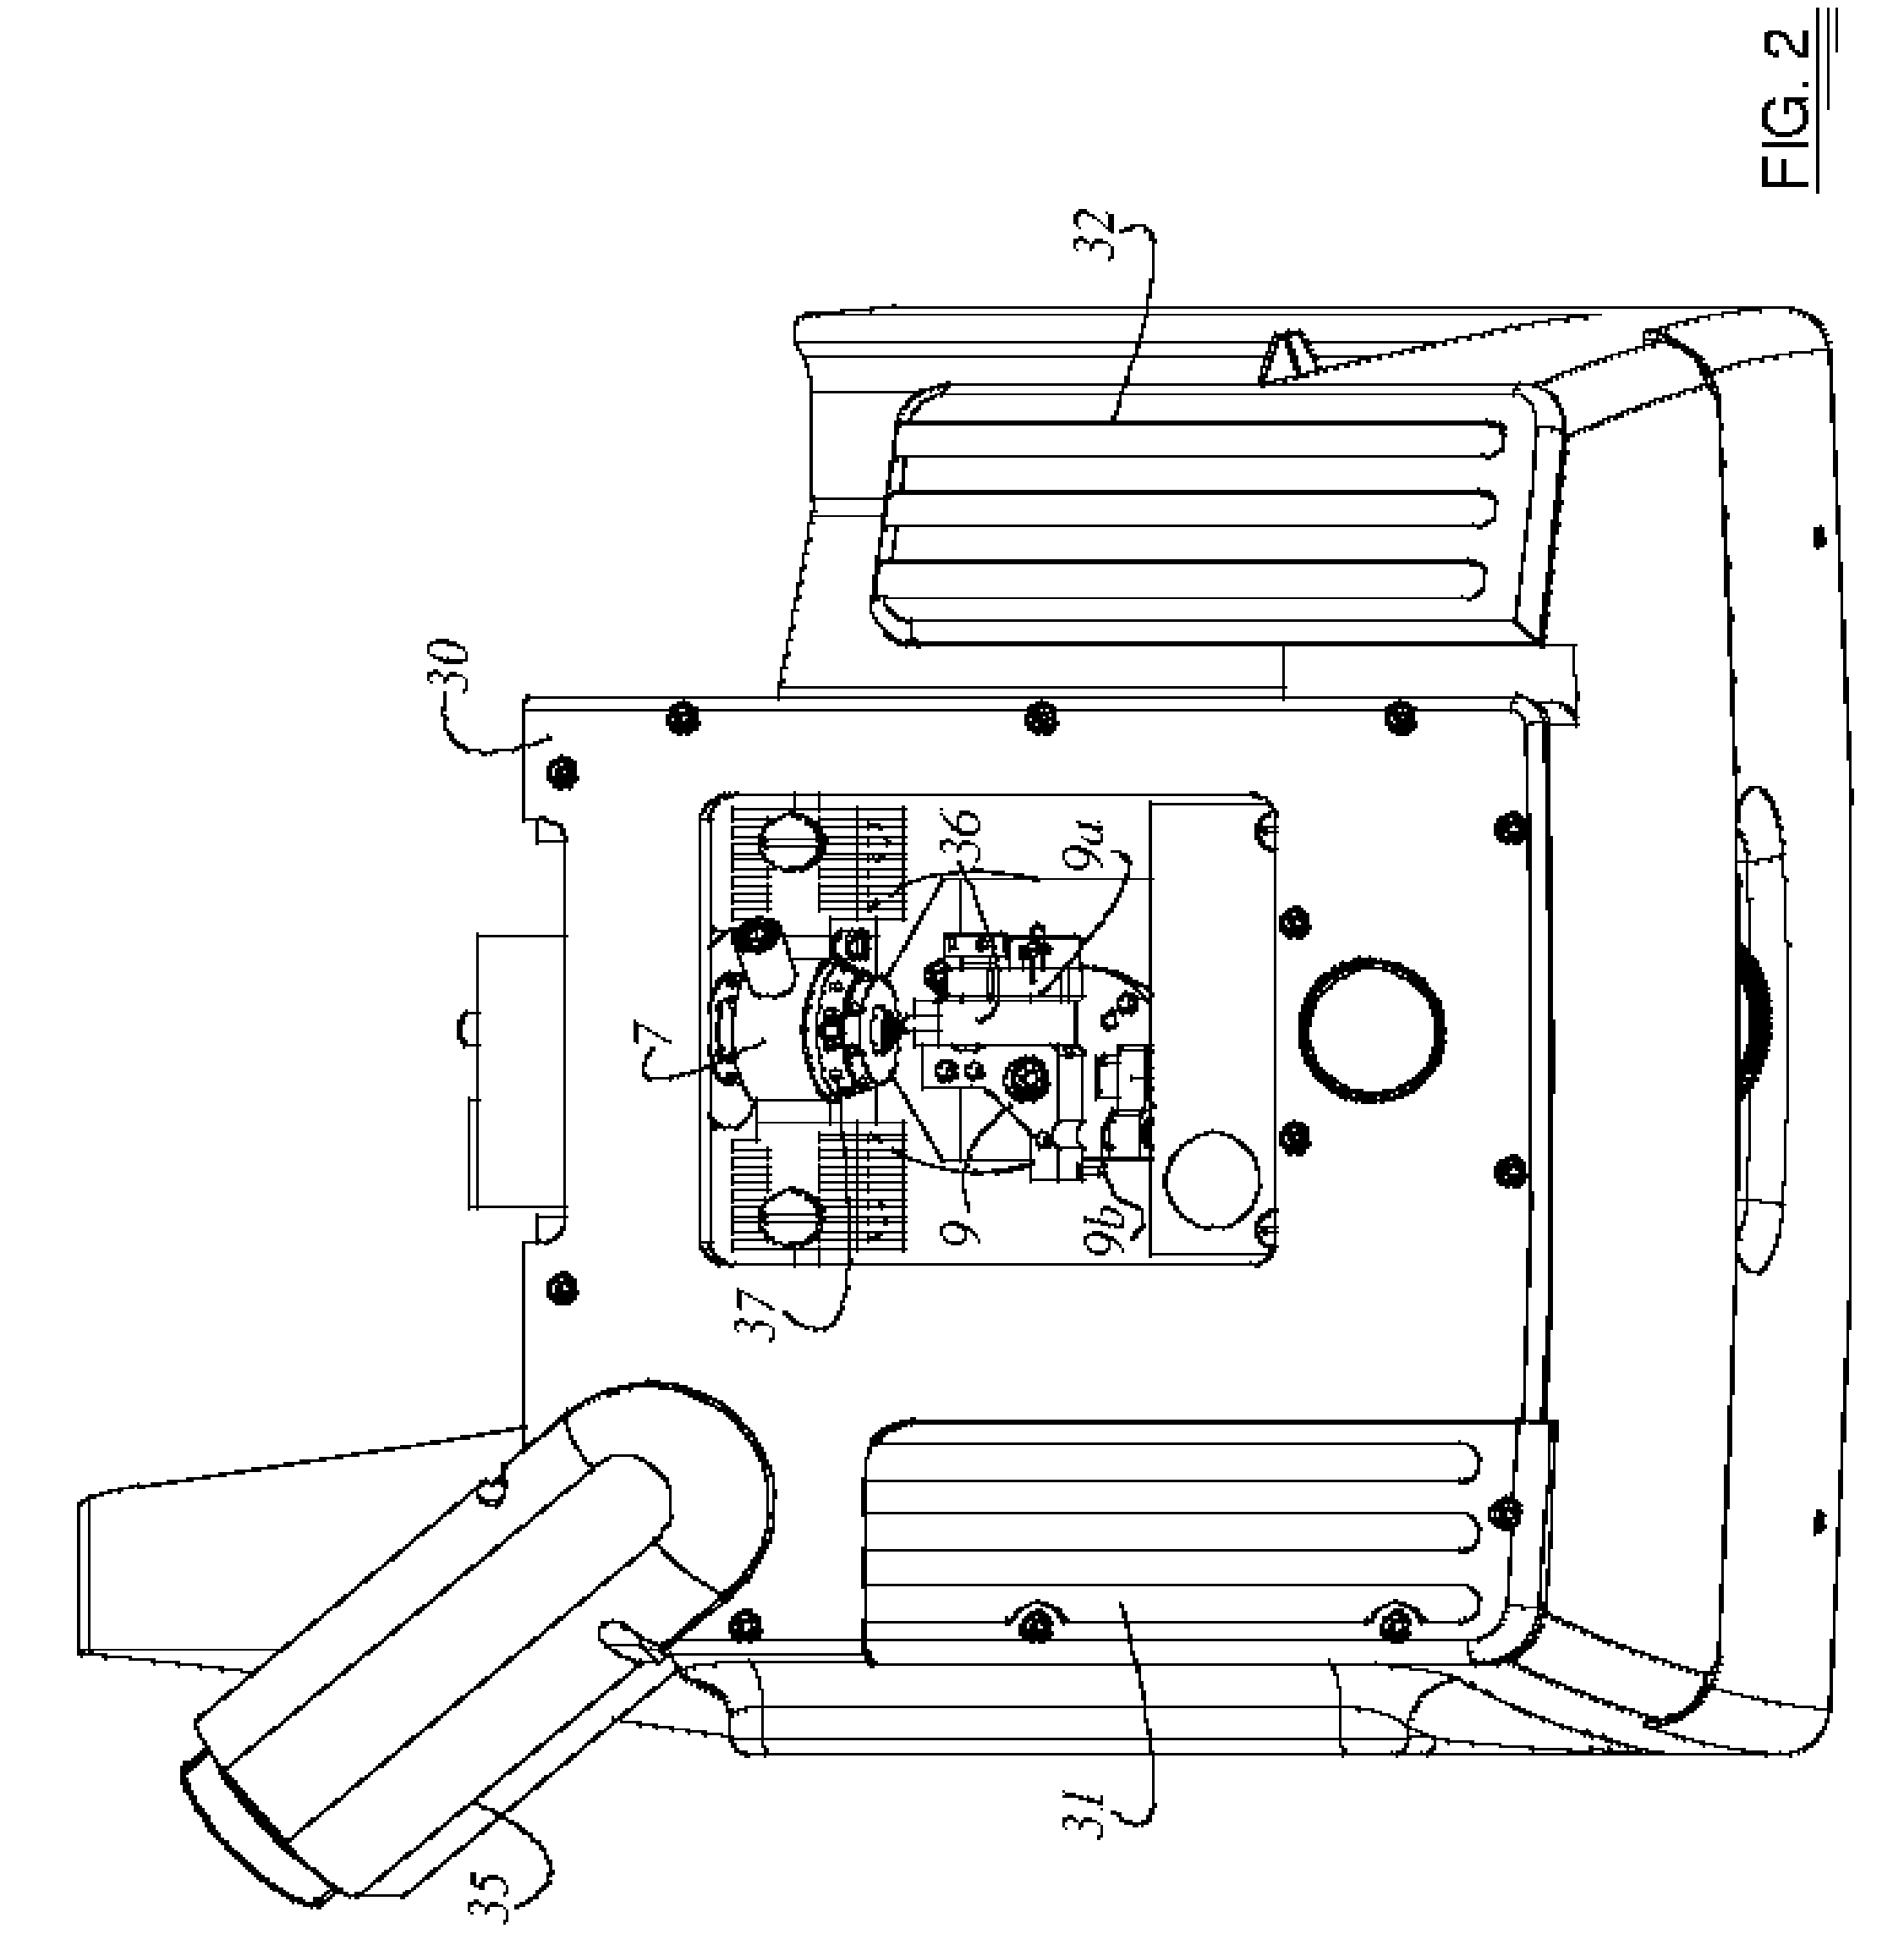 Device and method for trimming samples